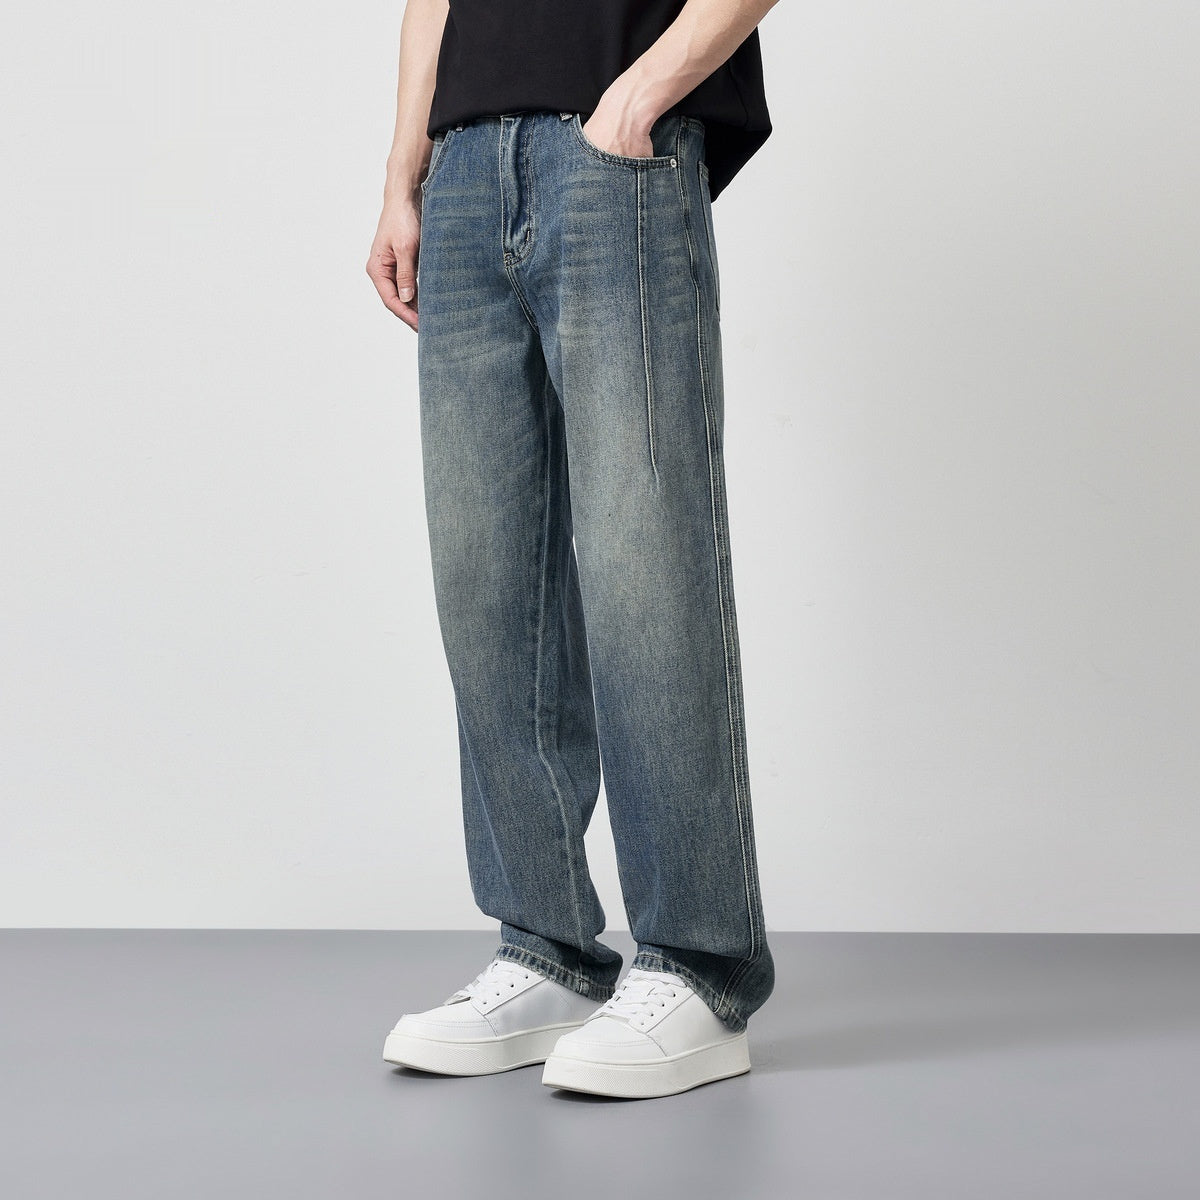 Lysel Lyocell Jeans Boot-cut Pencil Pants Leisure